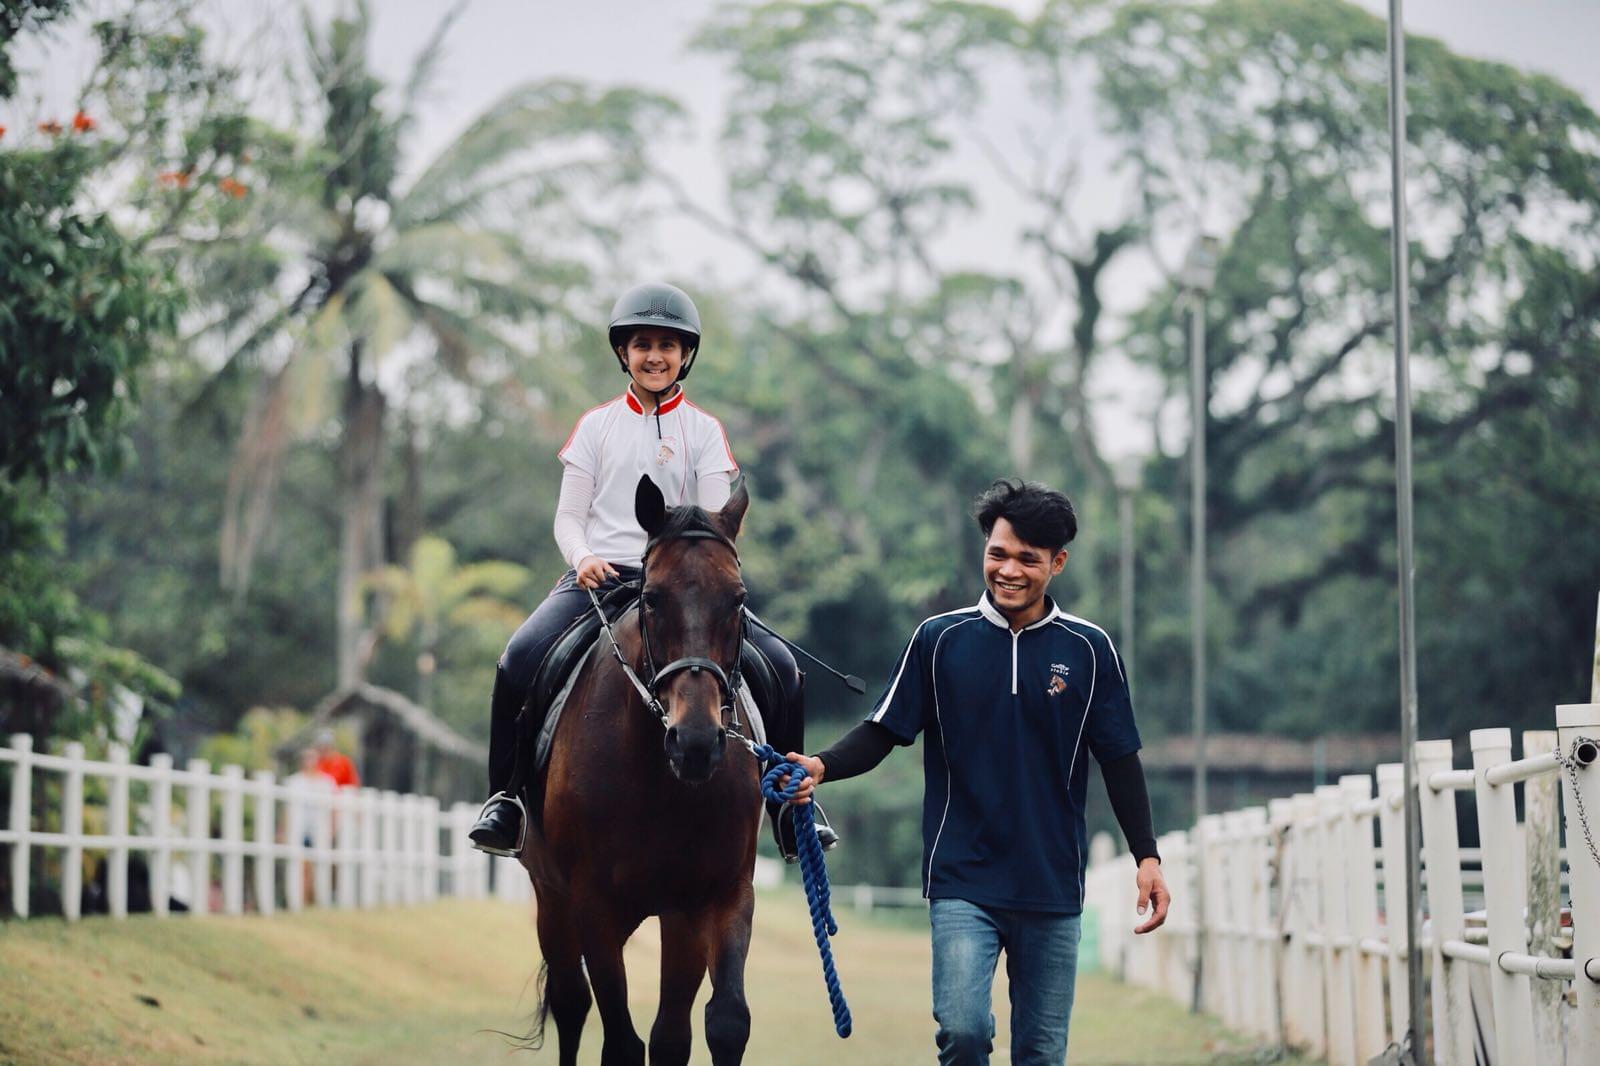 Learn the horse riding lessons from the guide for safe activity